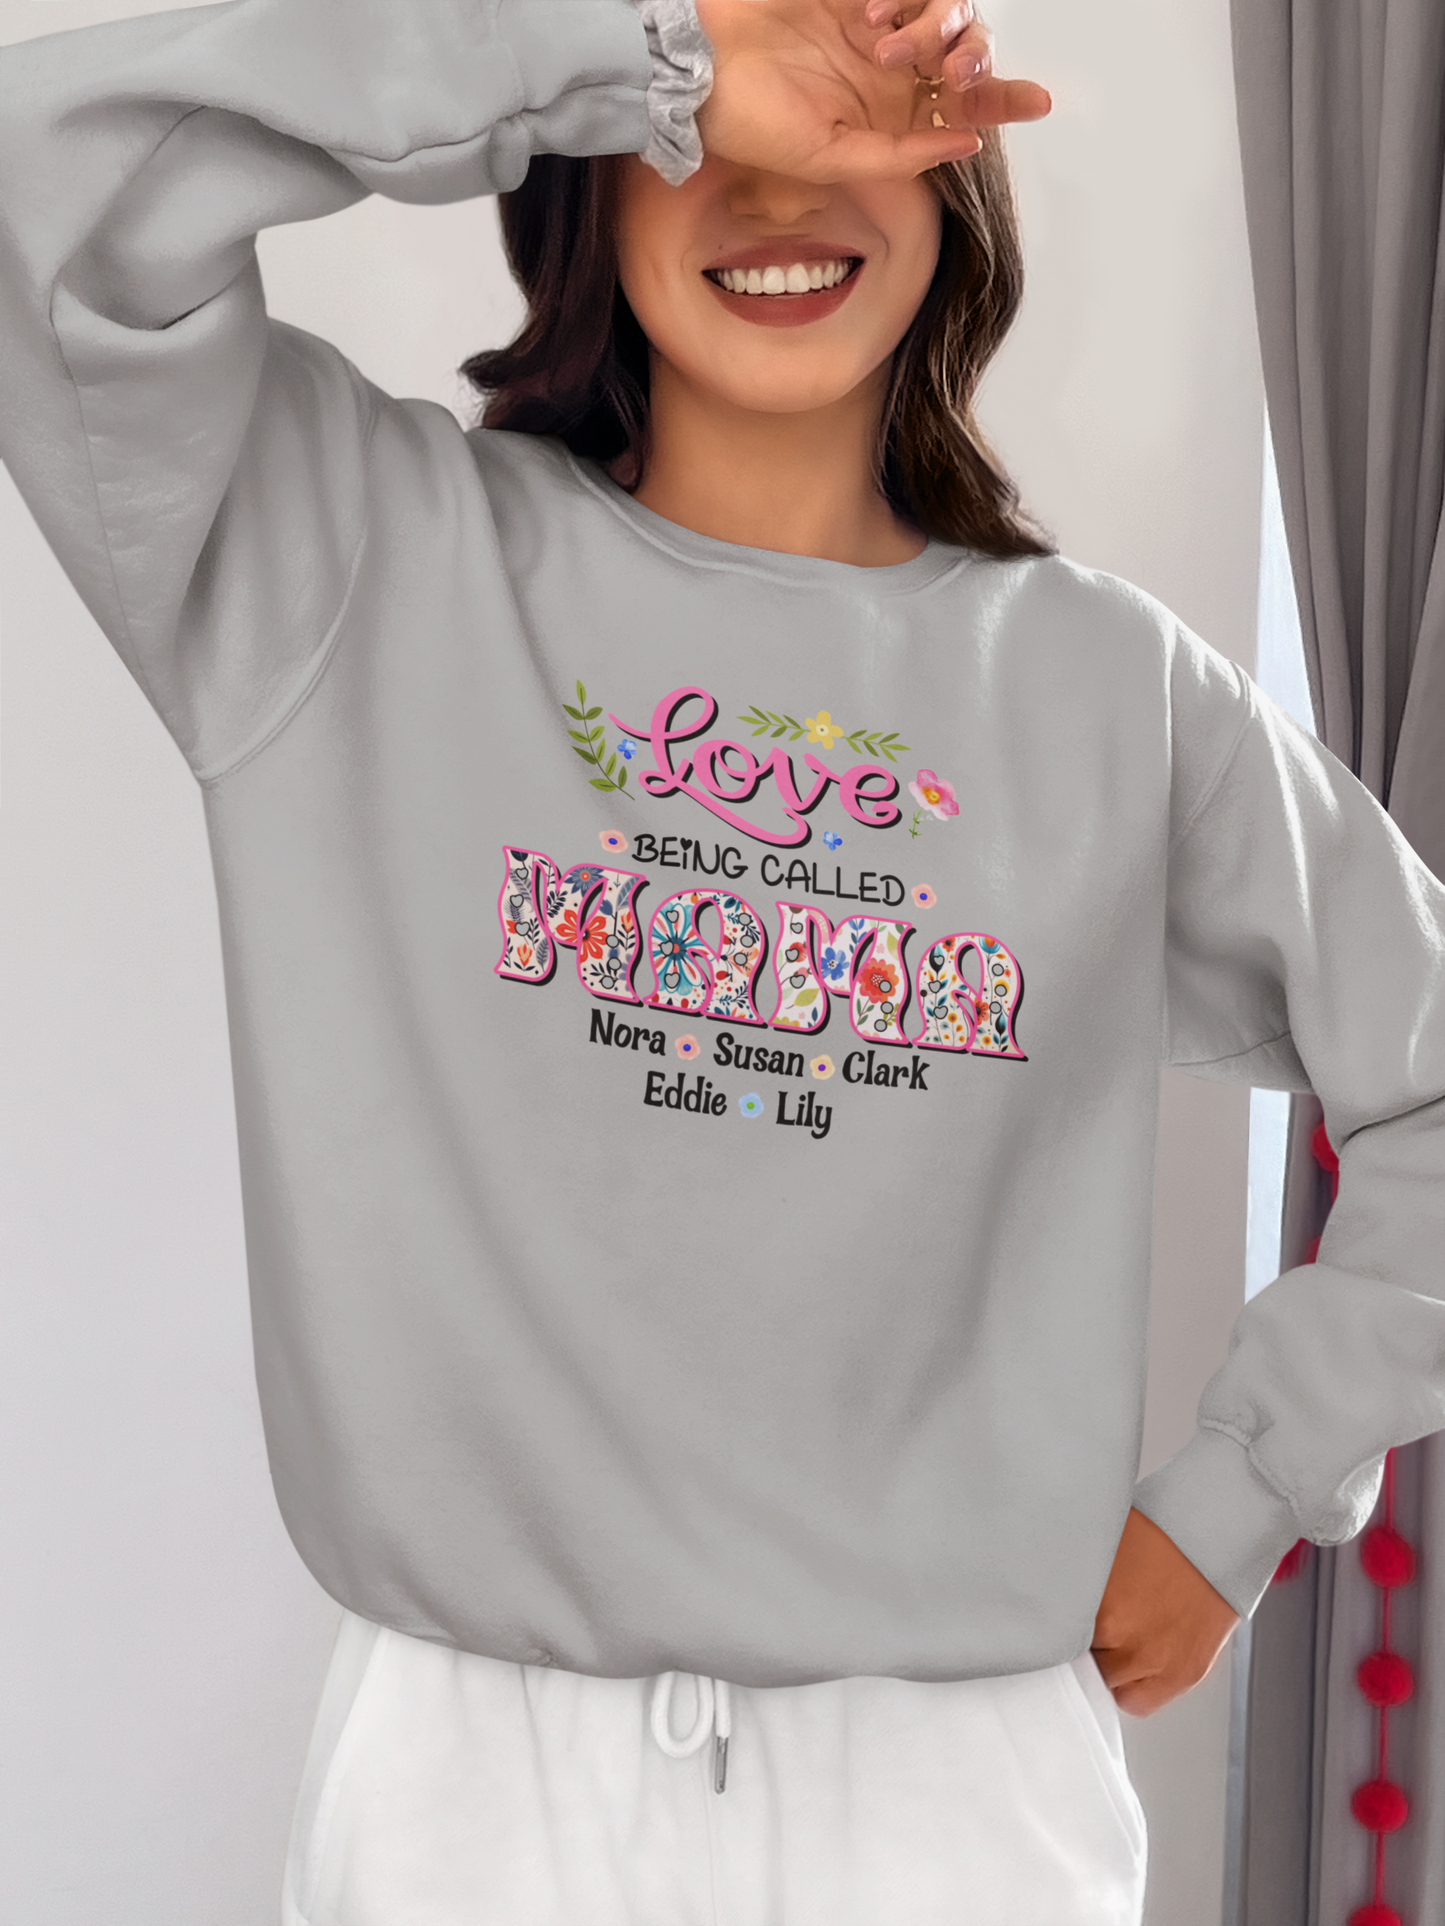 Love Being Called Mama Shirt, Best Quote For Mother's Day Shirt, Colorful Floral Personalized Gift Shirt For Mother's Day, Custom Kids Name Shirt For Mom, Retro Vintage Floral Shirt For Mom, Meaningful Quote Shirt For Mother's Day